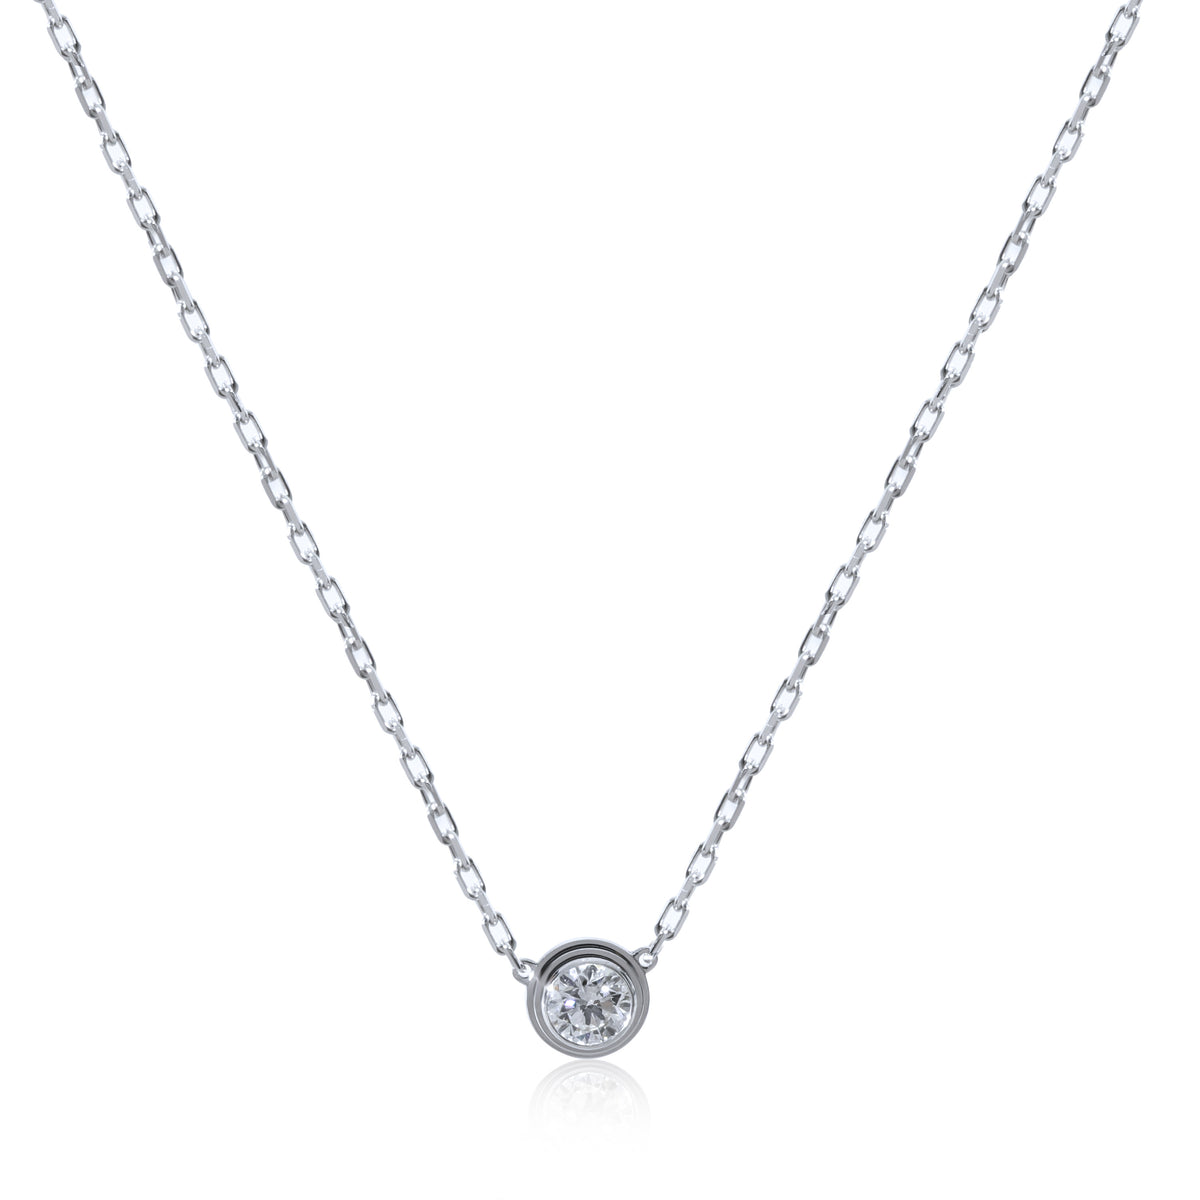 Cartier Damour LM Diamond Necklace 750 (YG) 3.0g – Timeless Vintage